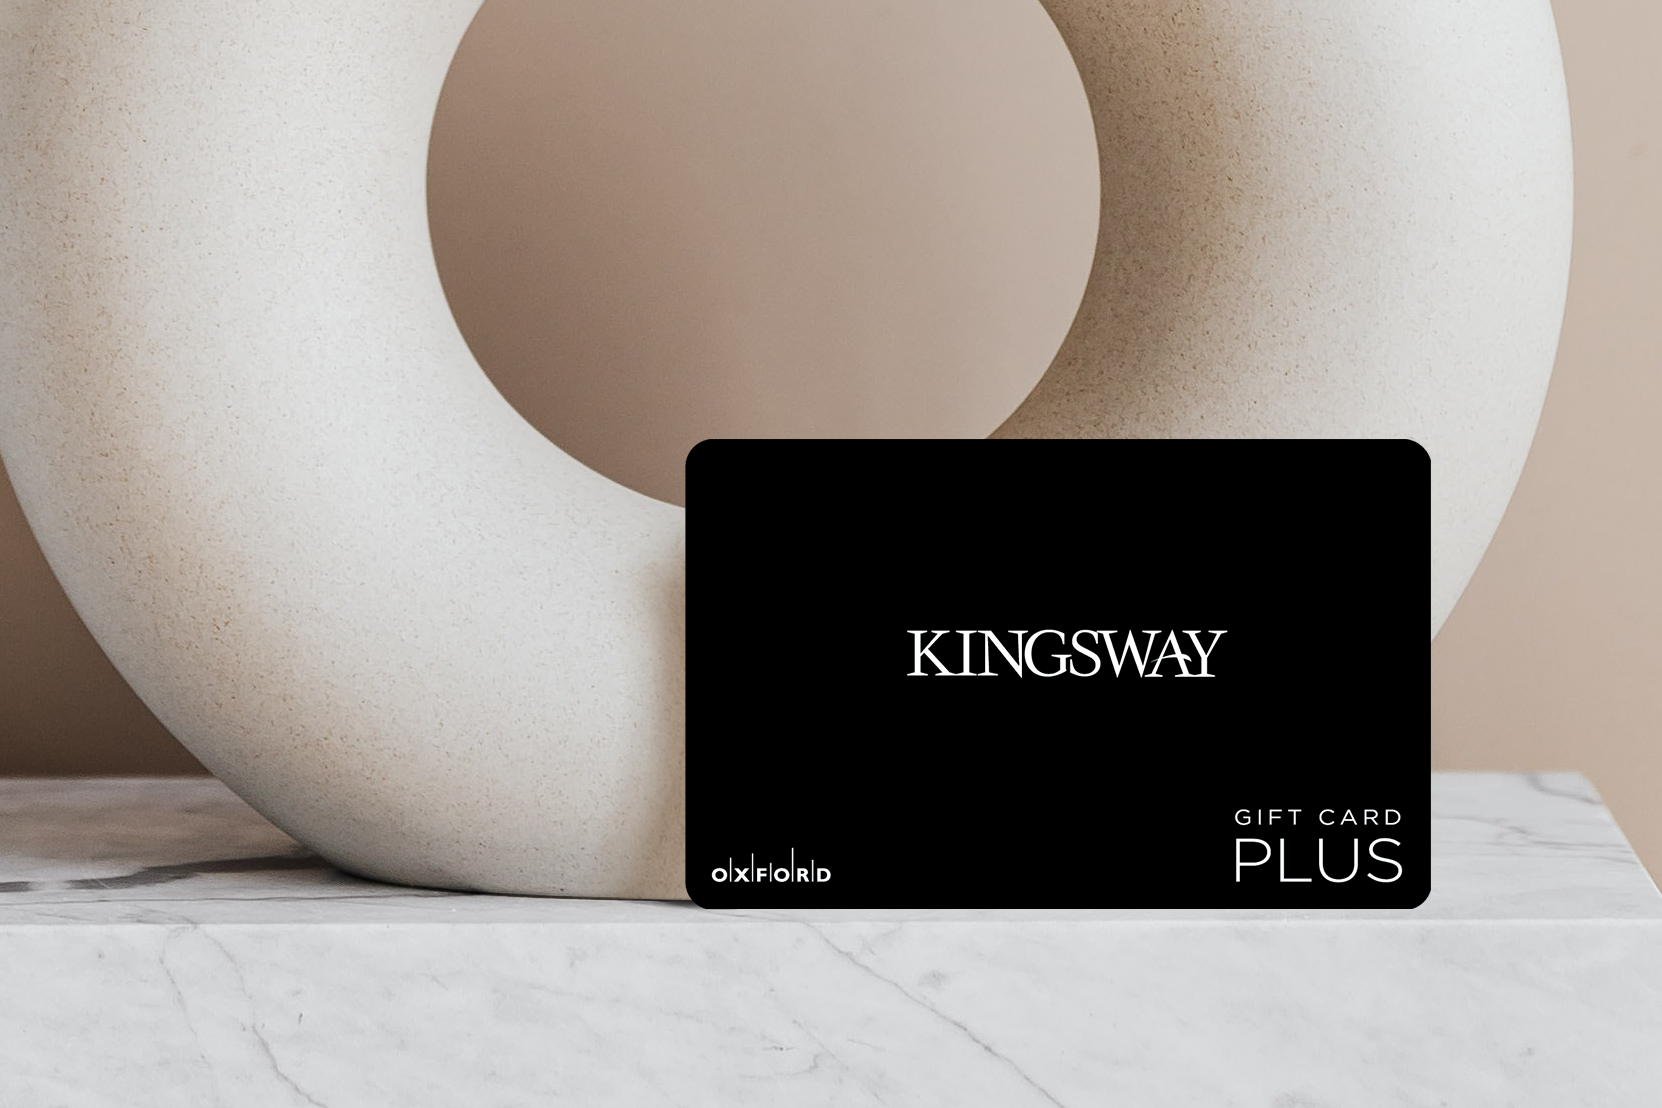 promotional image of a black kingsway gift card in front of an oval ceramic vase